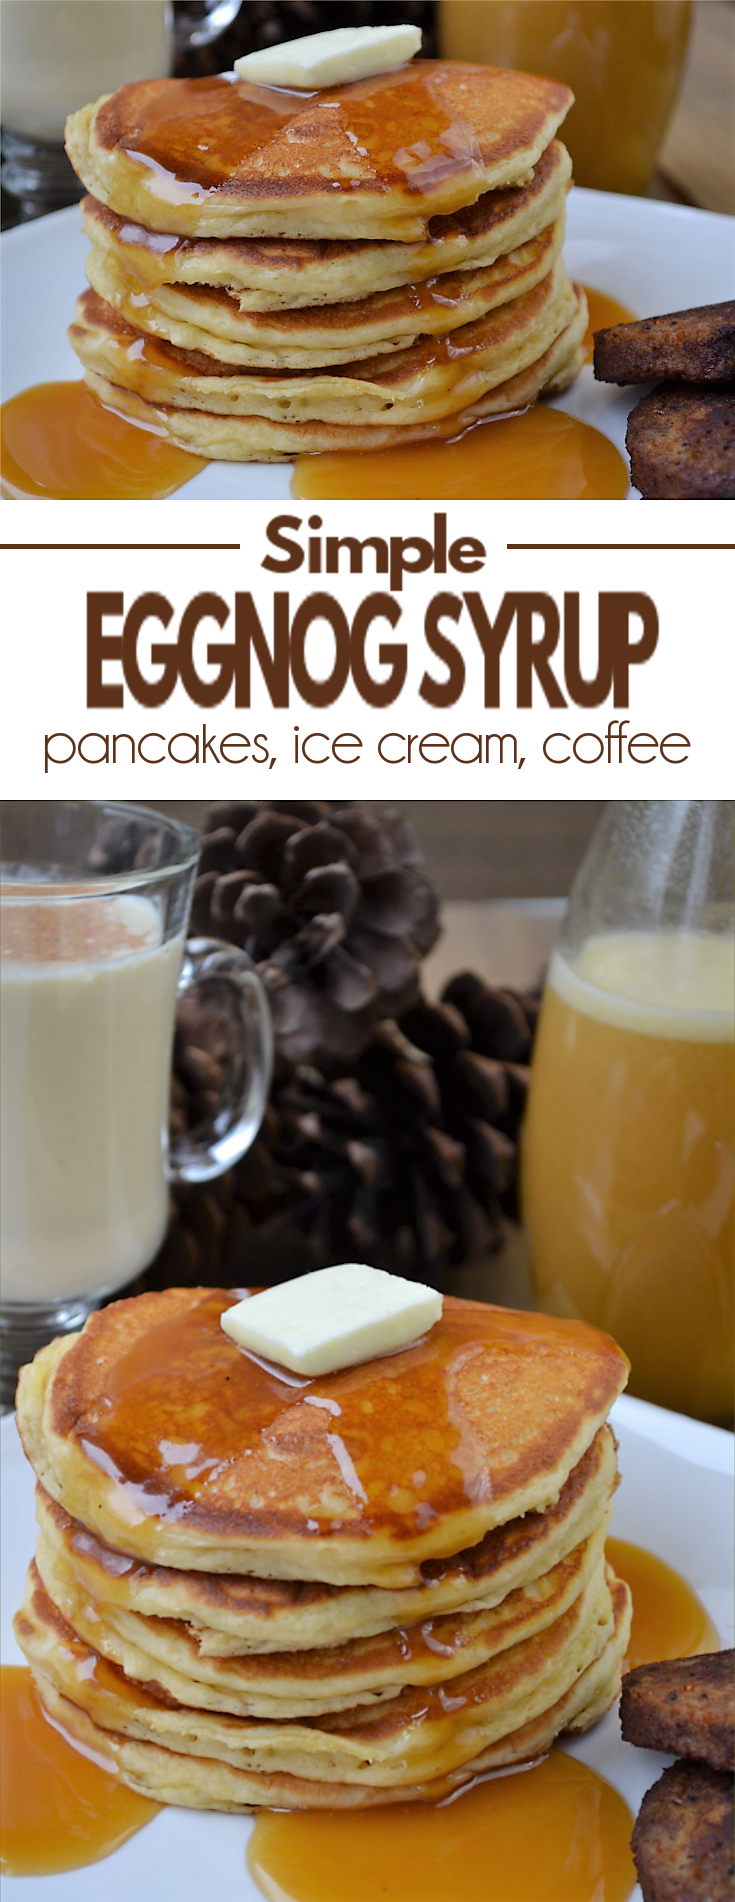 Eggnog Syrup - A simple recipe that has a sweet and rich eggnog flavor with a nice creamy texture. Pour over pancakes, waffles, ice cream, oatmeal or in coffee.